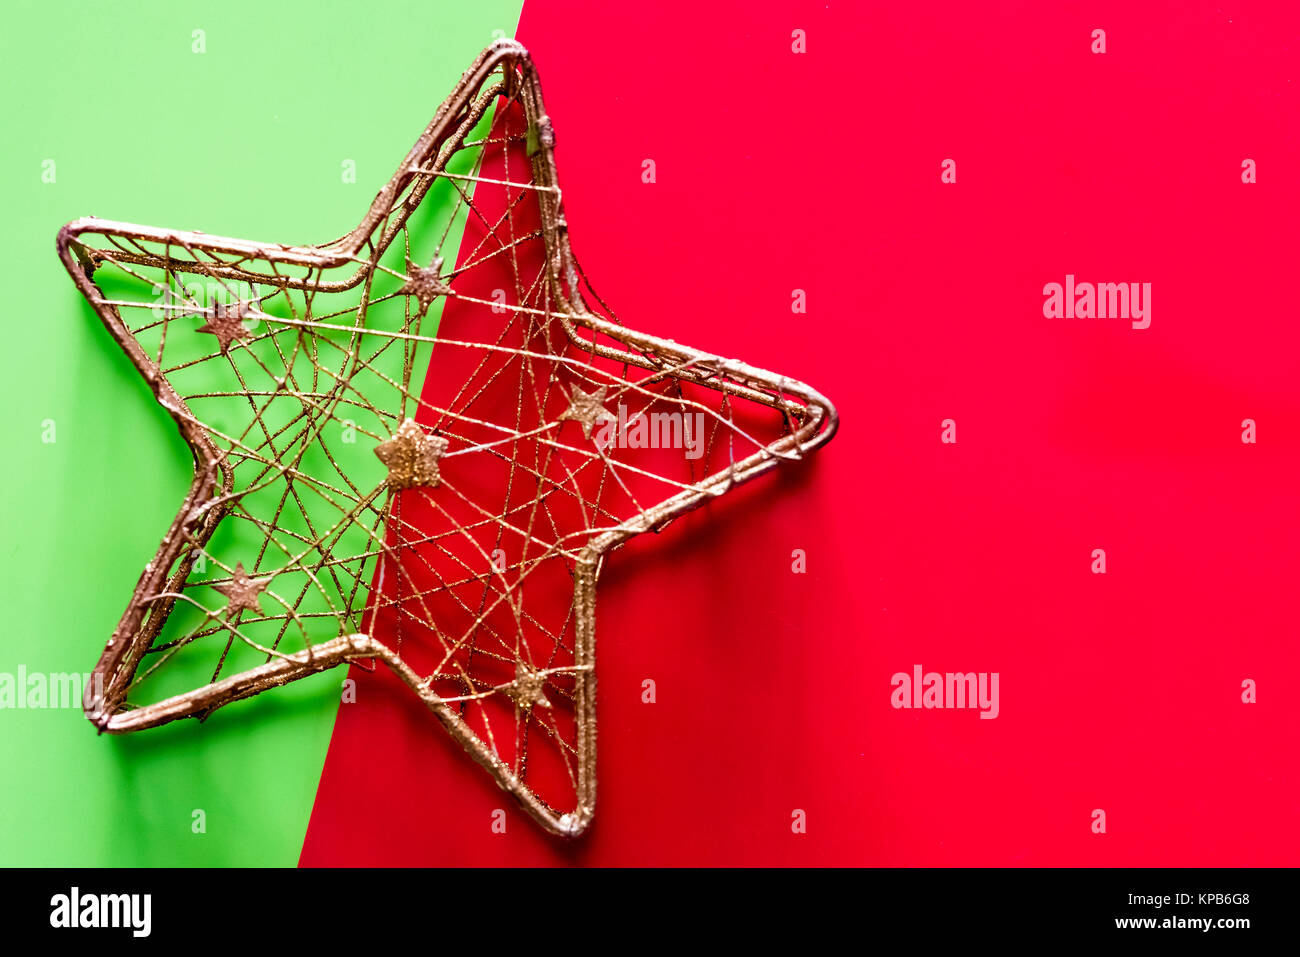 Modern gold star Christmas decoration on green and red, room for text. Golden festive ornament, top view, room for copy. Stock Photo